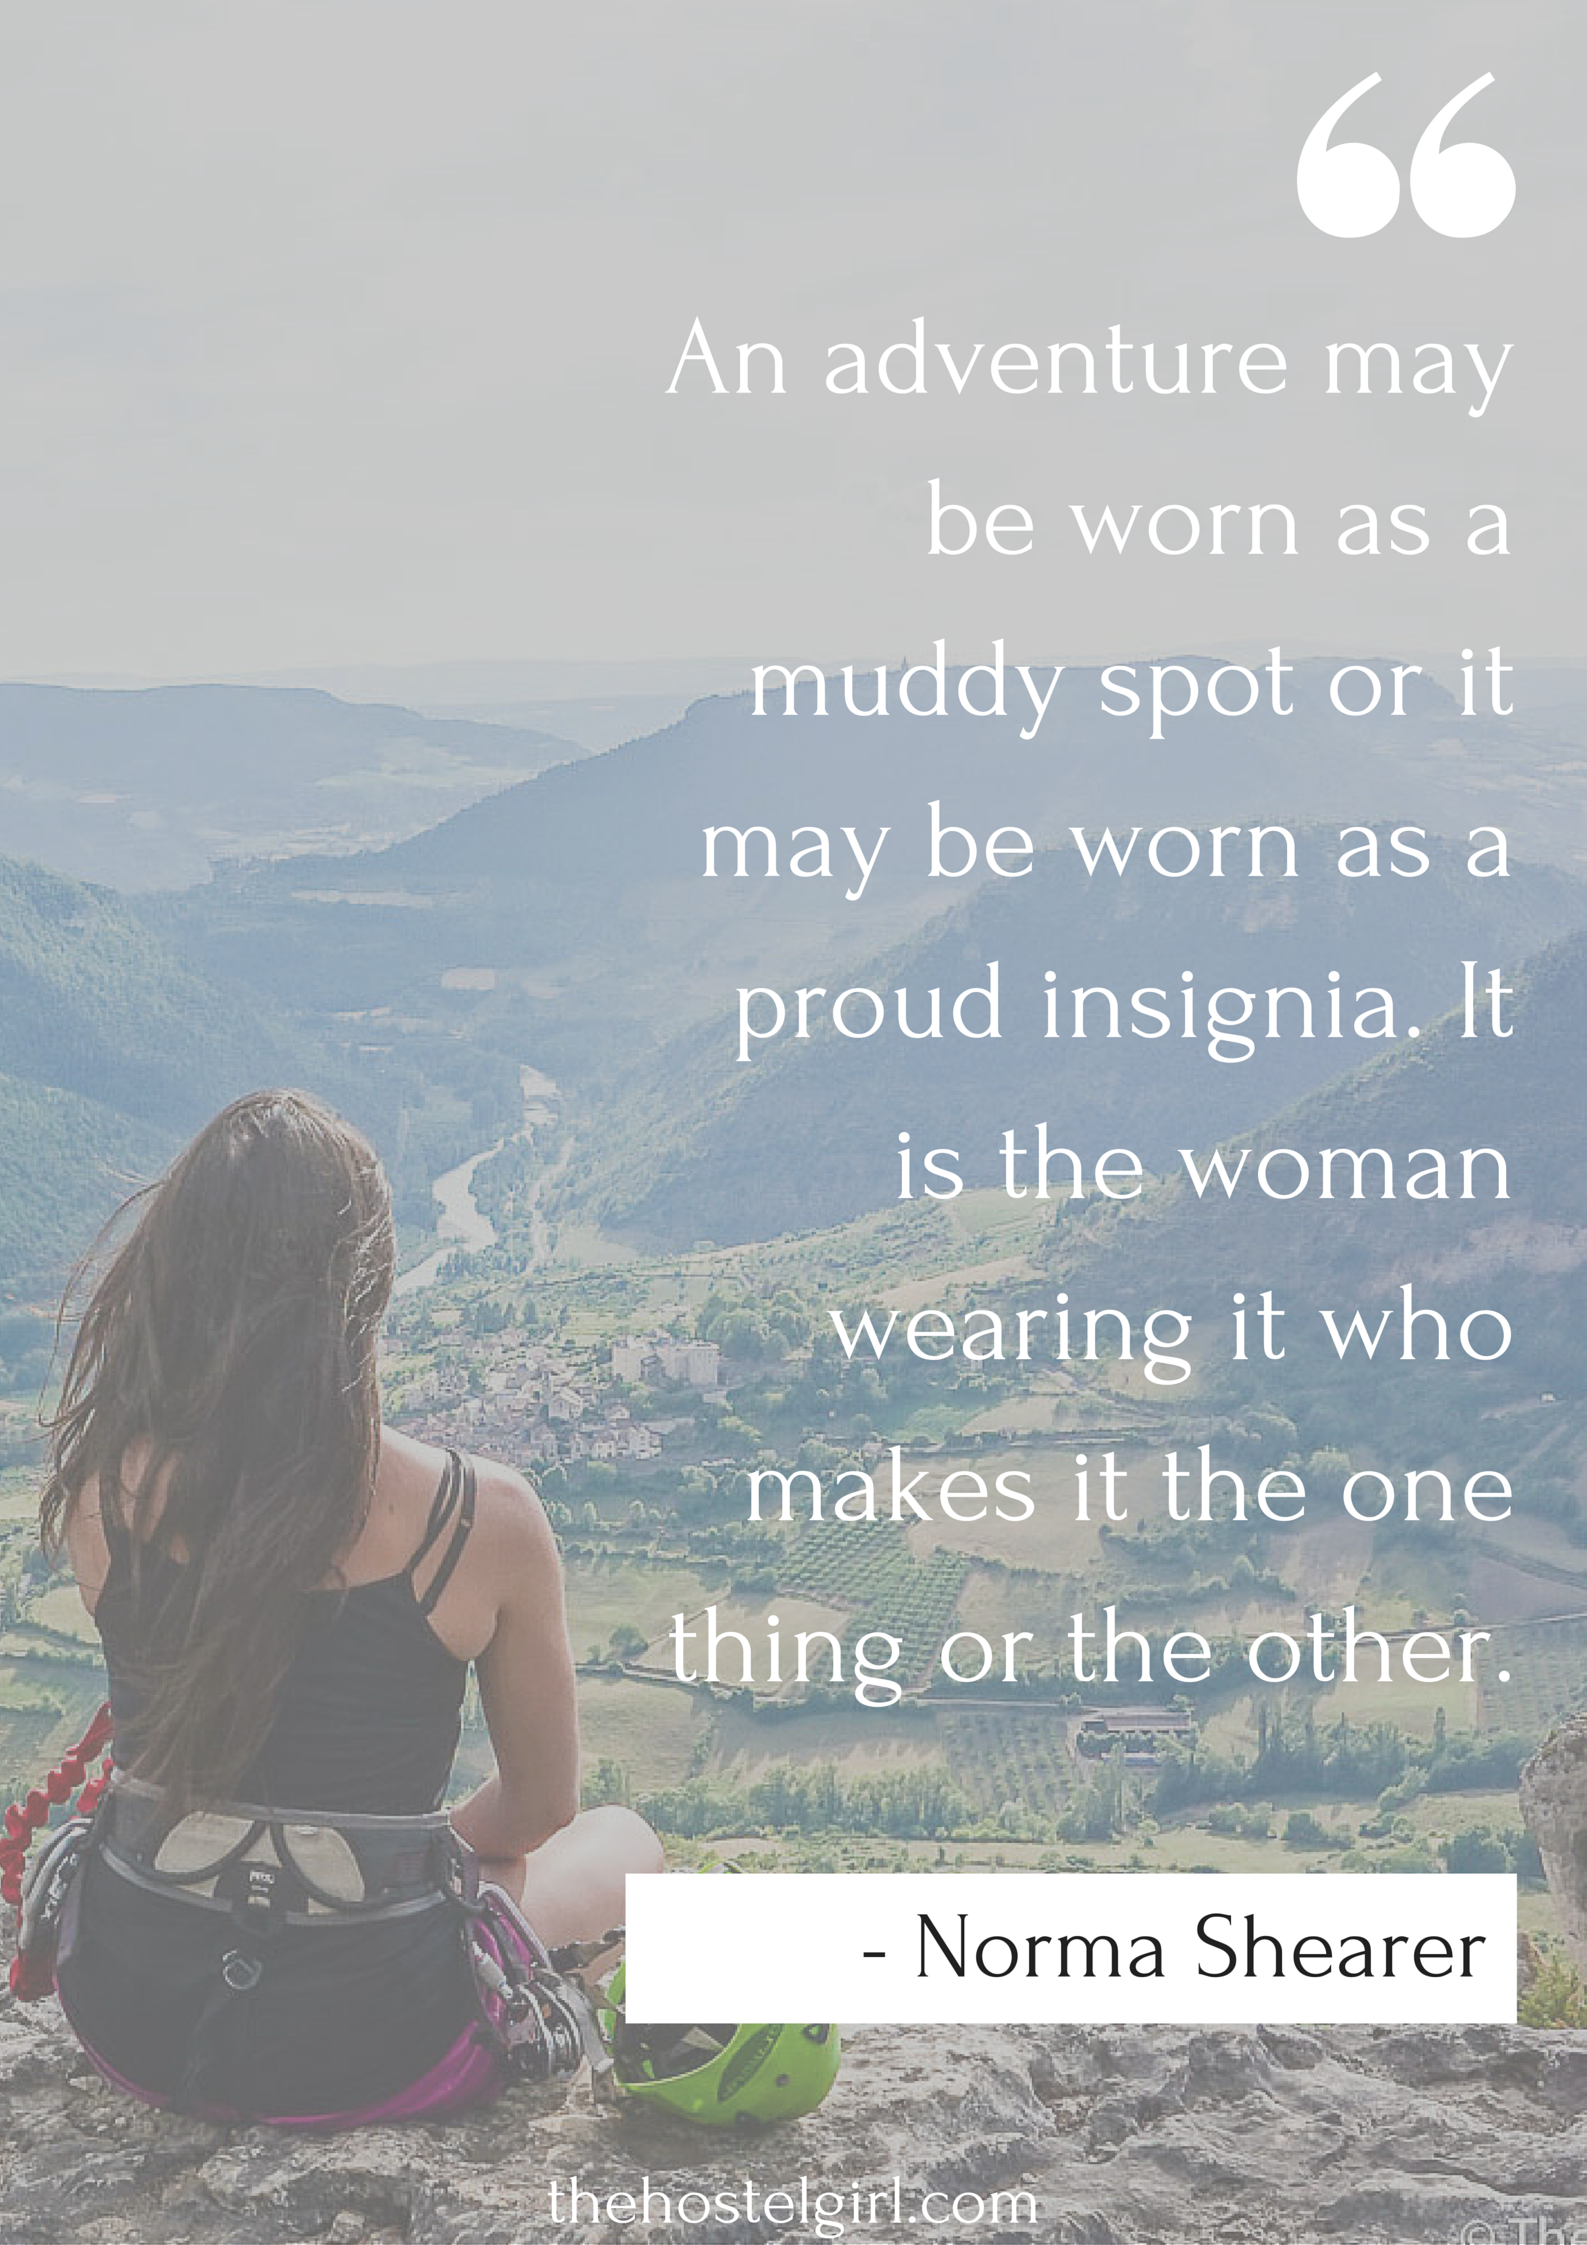 50 Solo Travel Quotes For Women Travelling Alone Solo Female Travel Inspiration 3